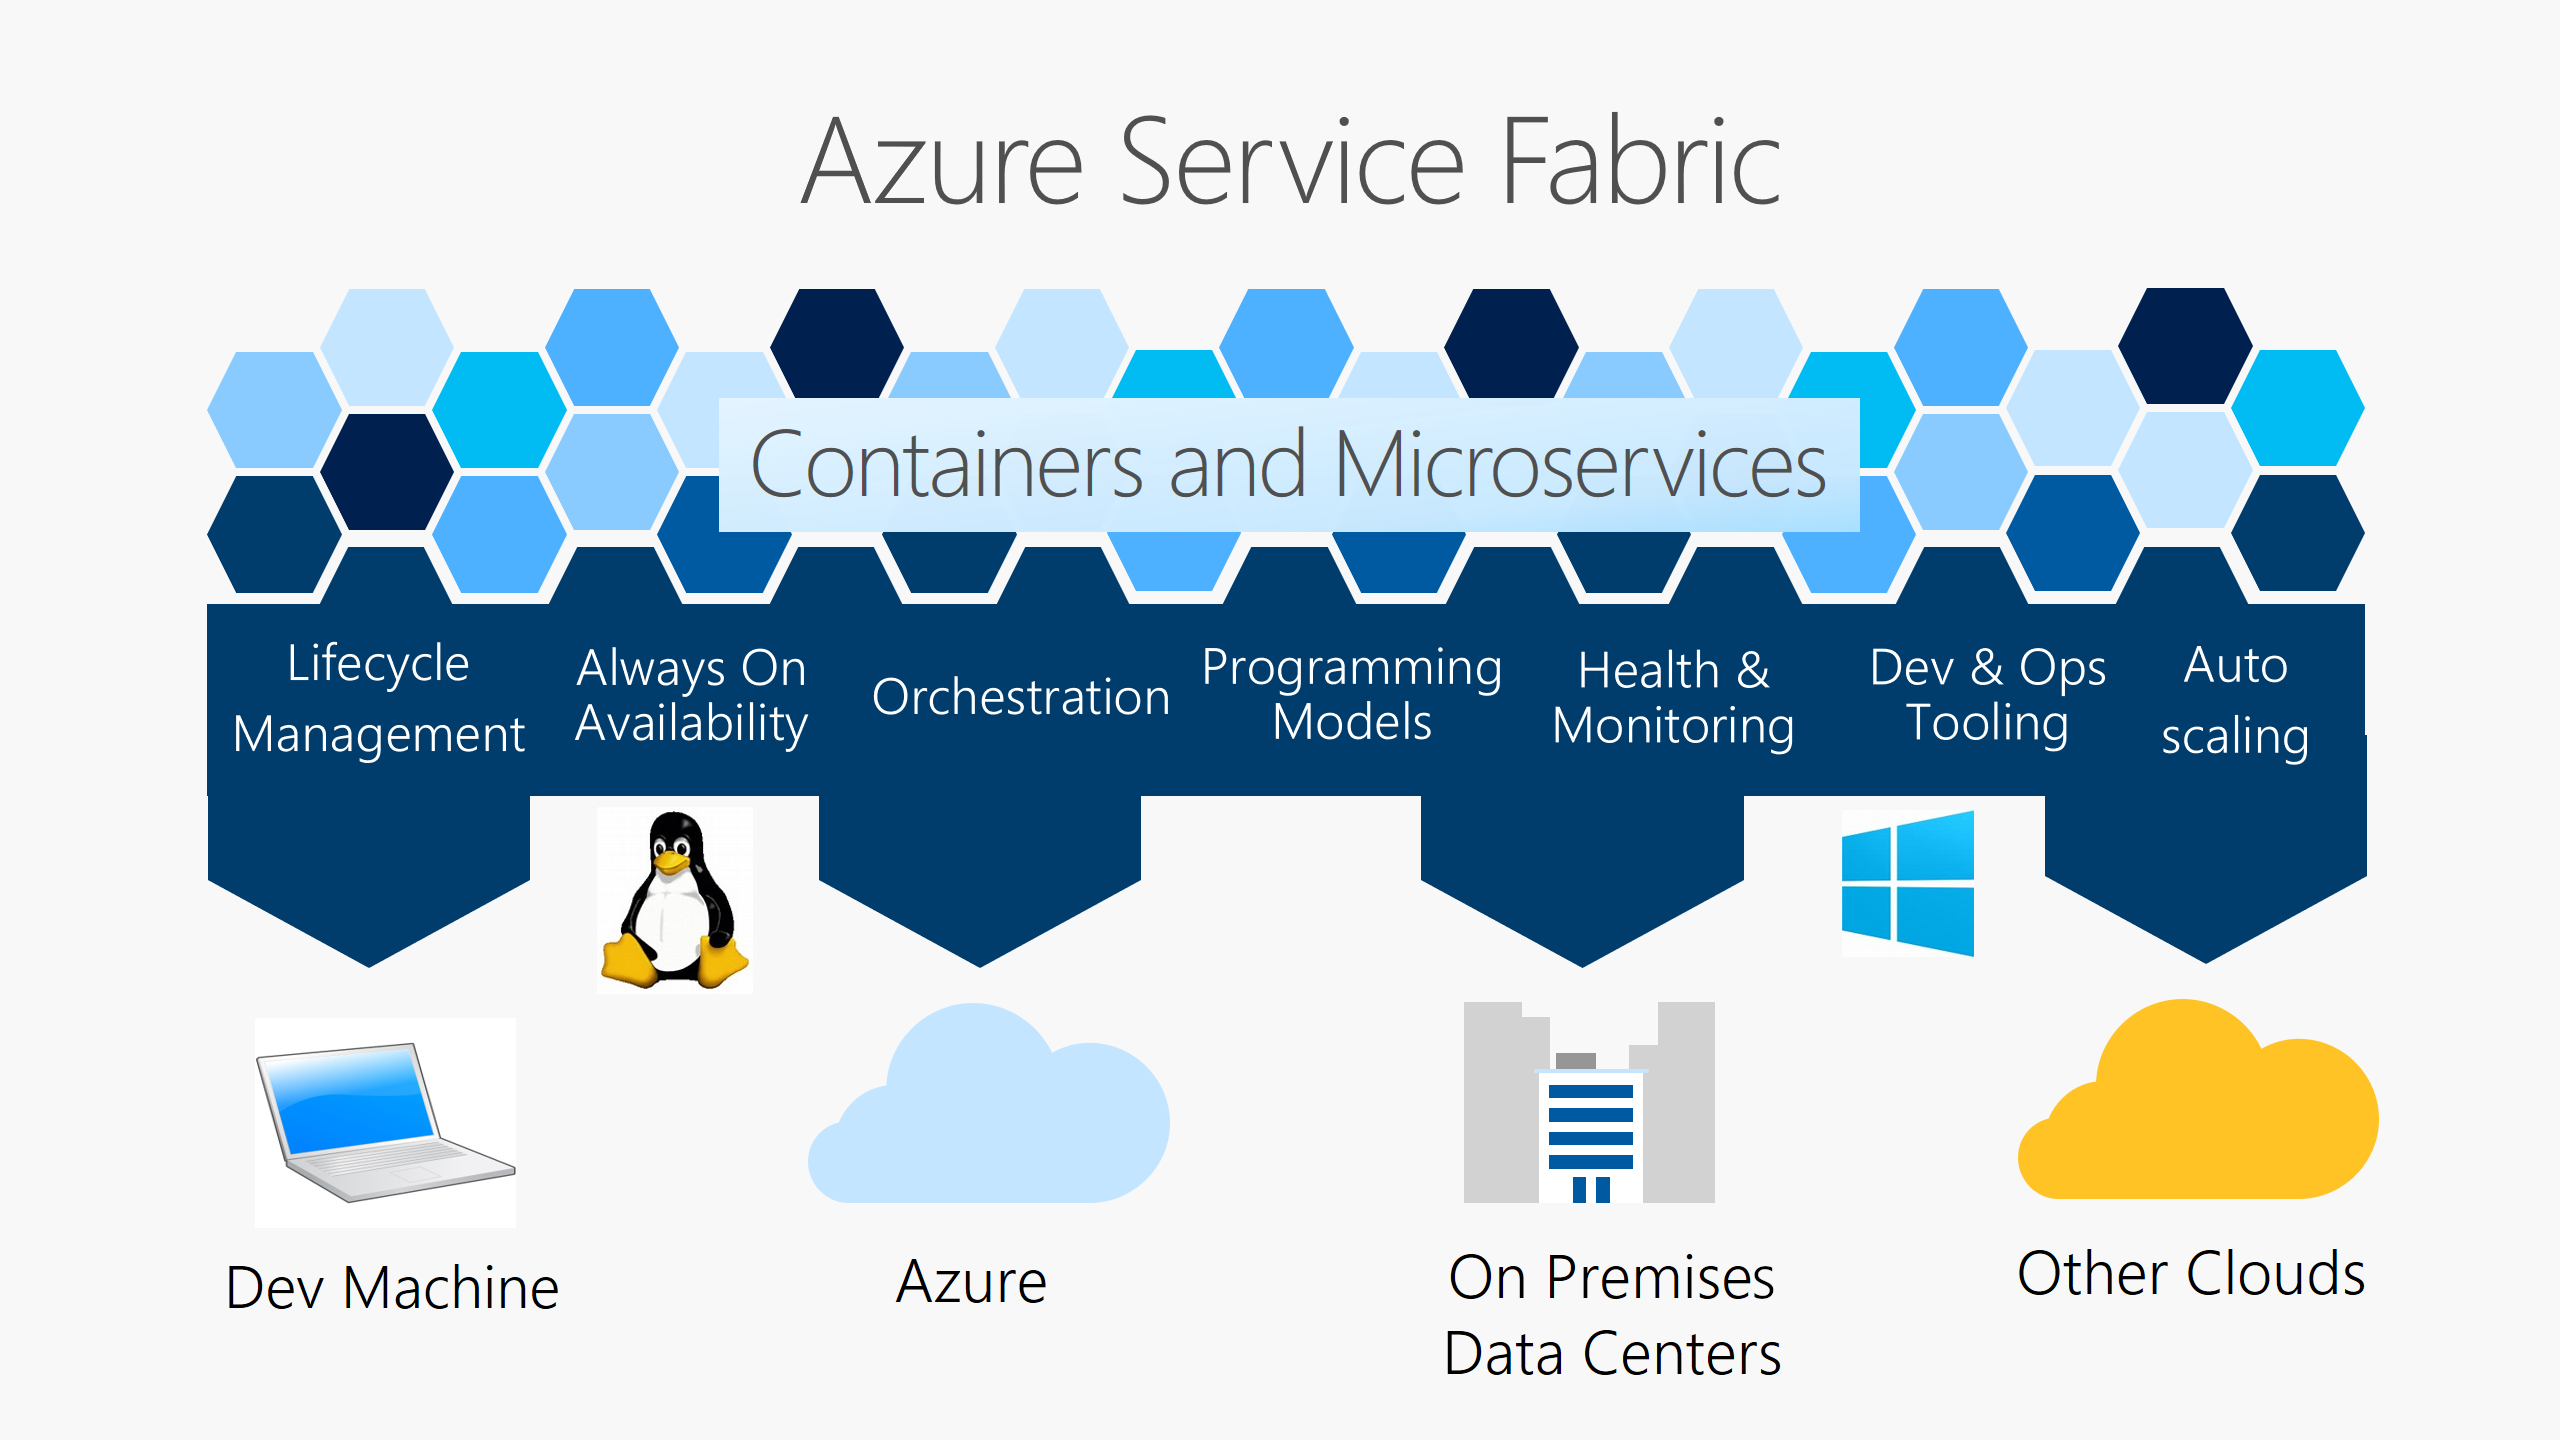 The Service Fabric platform provides lifecycle management, availability, orchestration, programming models, health and monitoring, dev and ops tooling, and autoscaling--in Azure, on premises, in other clouds, and on your dev machine